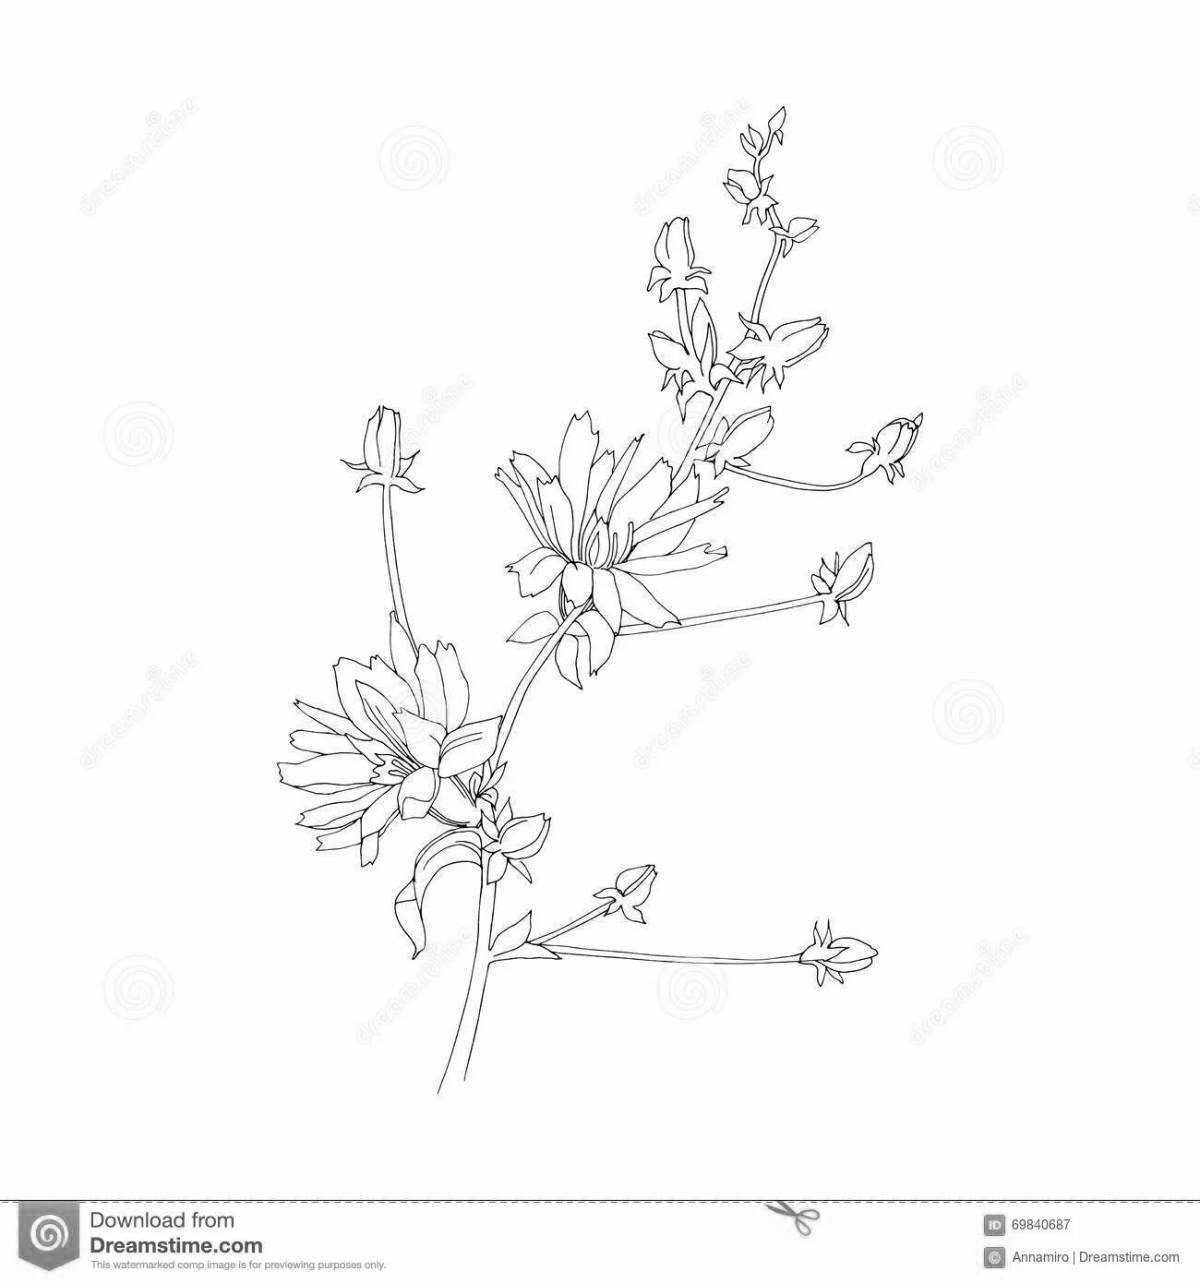 Vibrant chicory coloring page